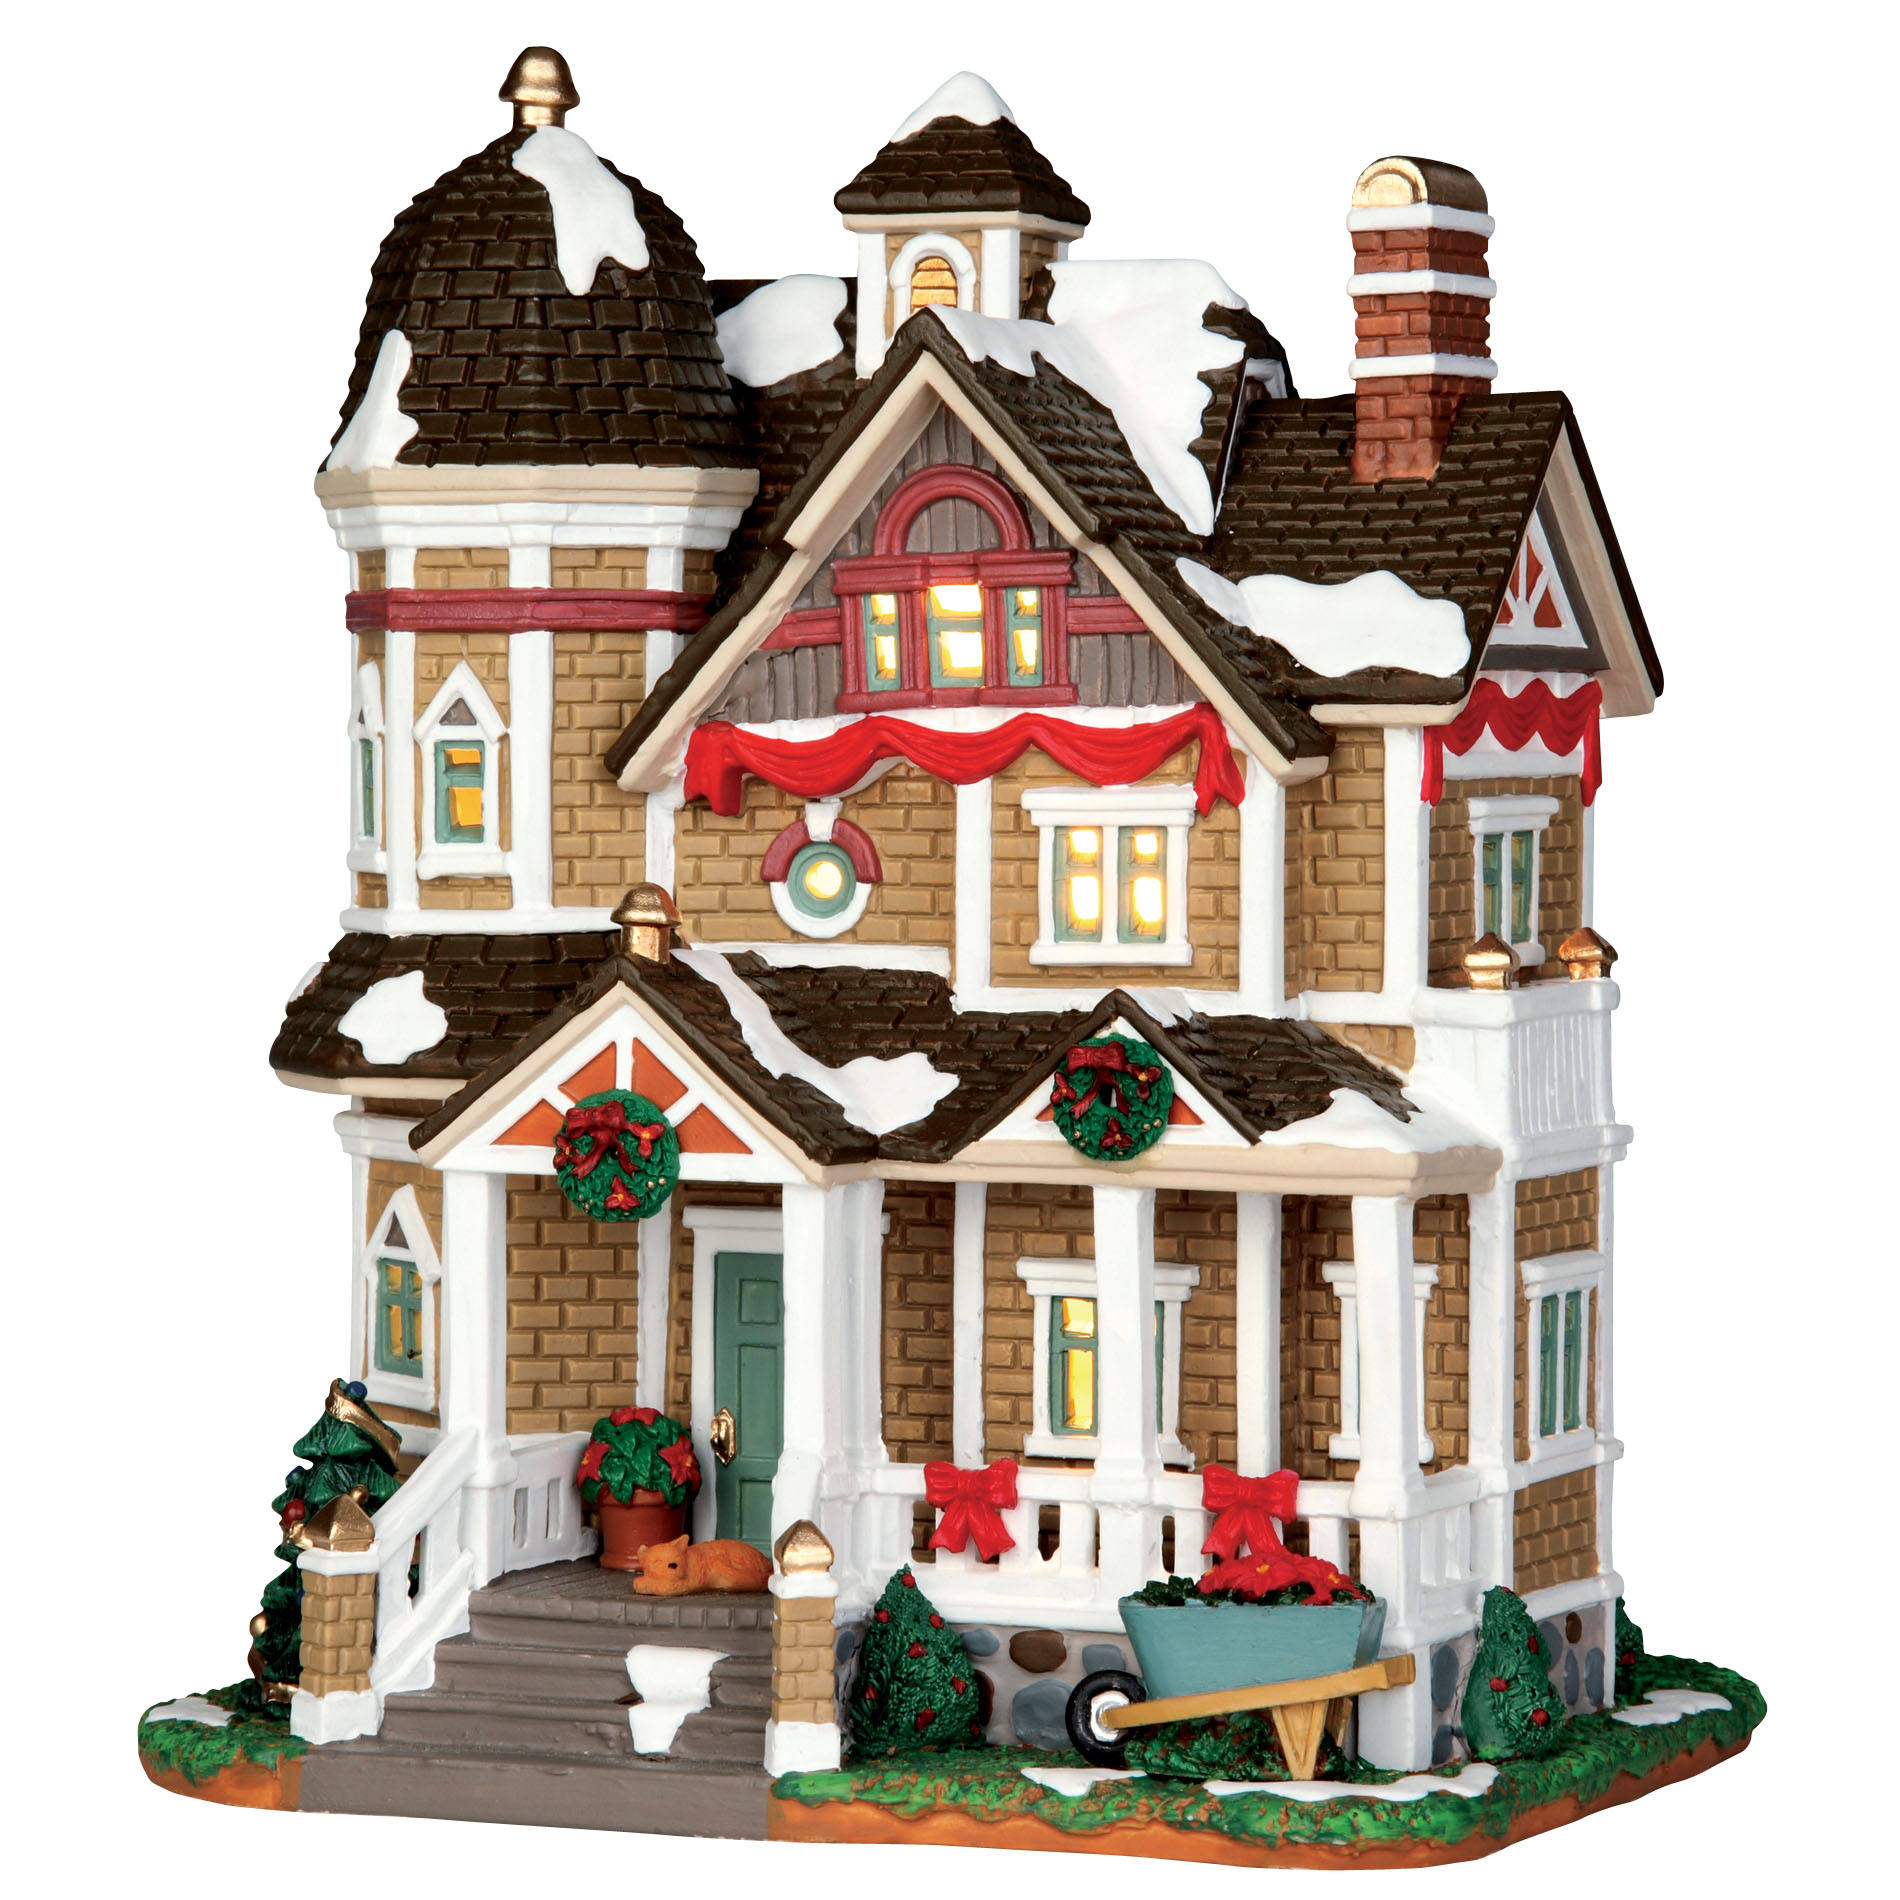 Lemax Village Collection Christmas Village Building, The Williams House